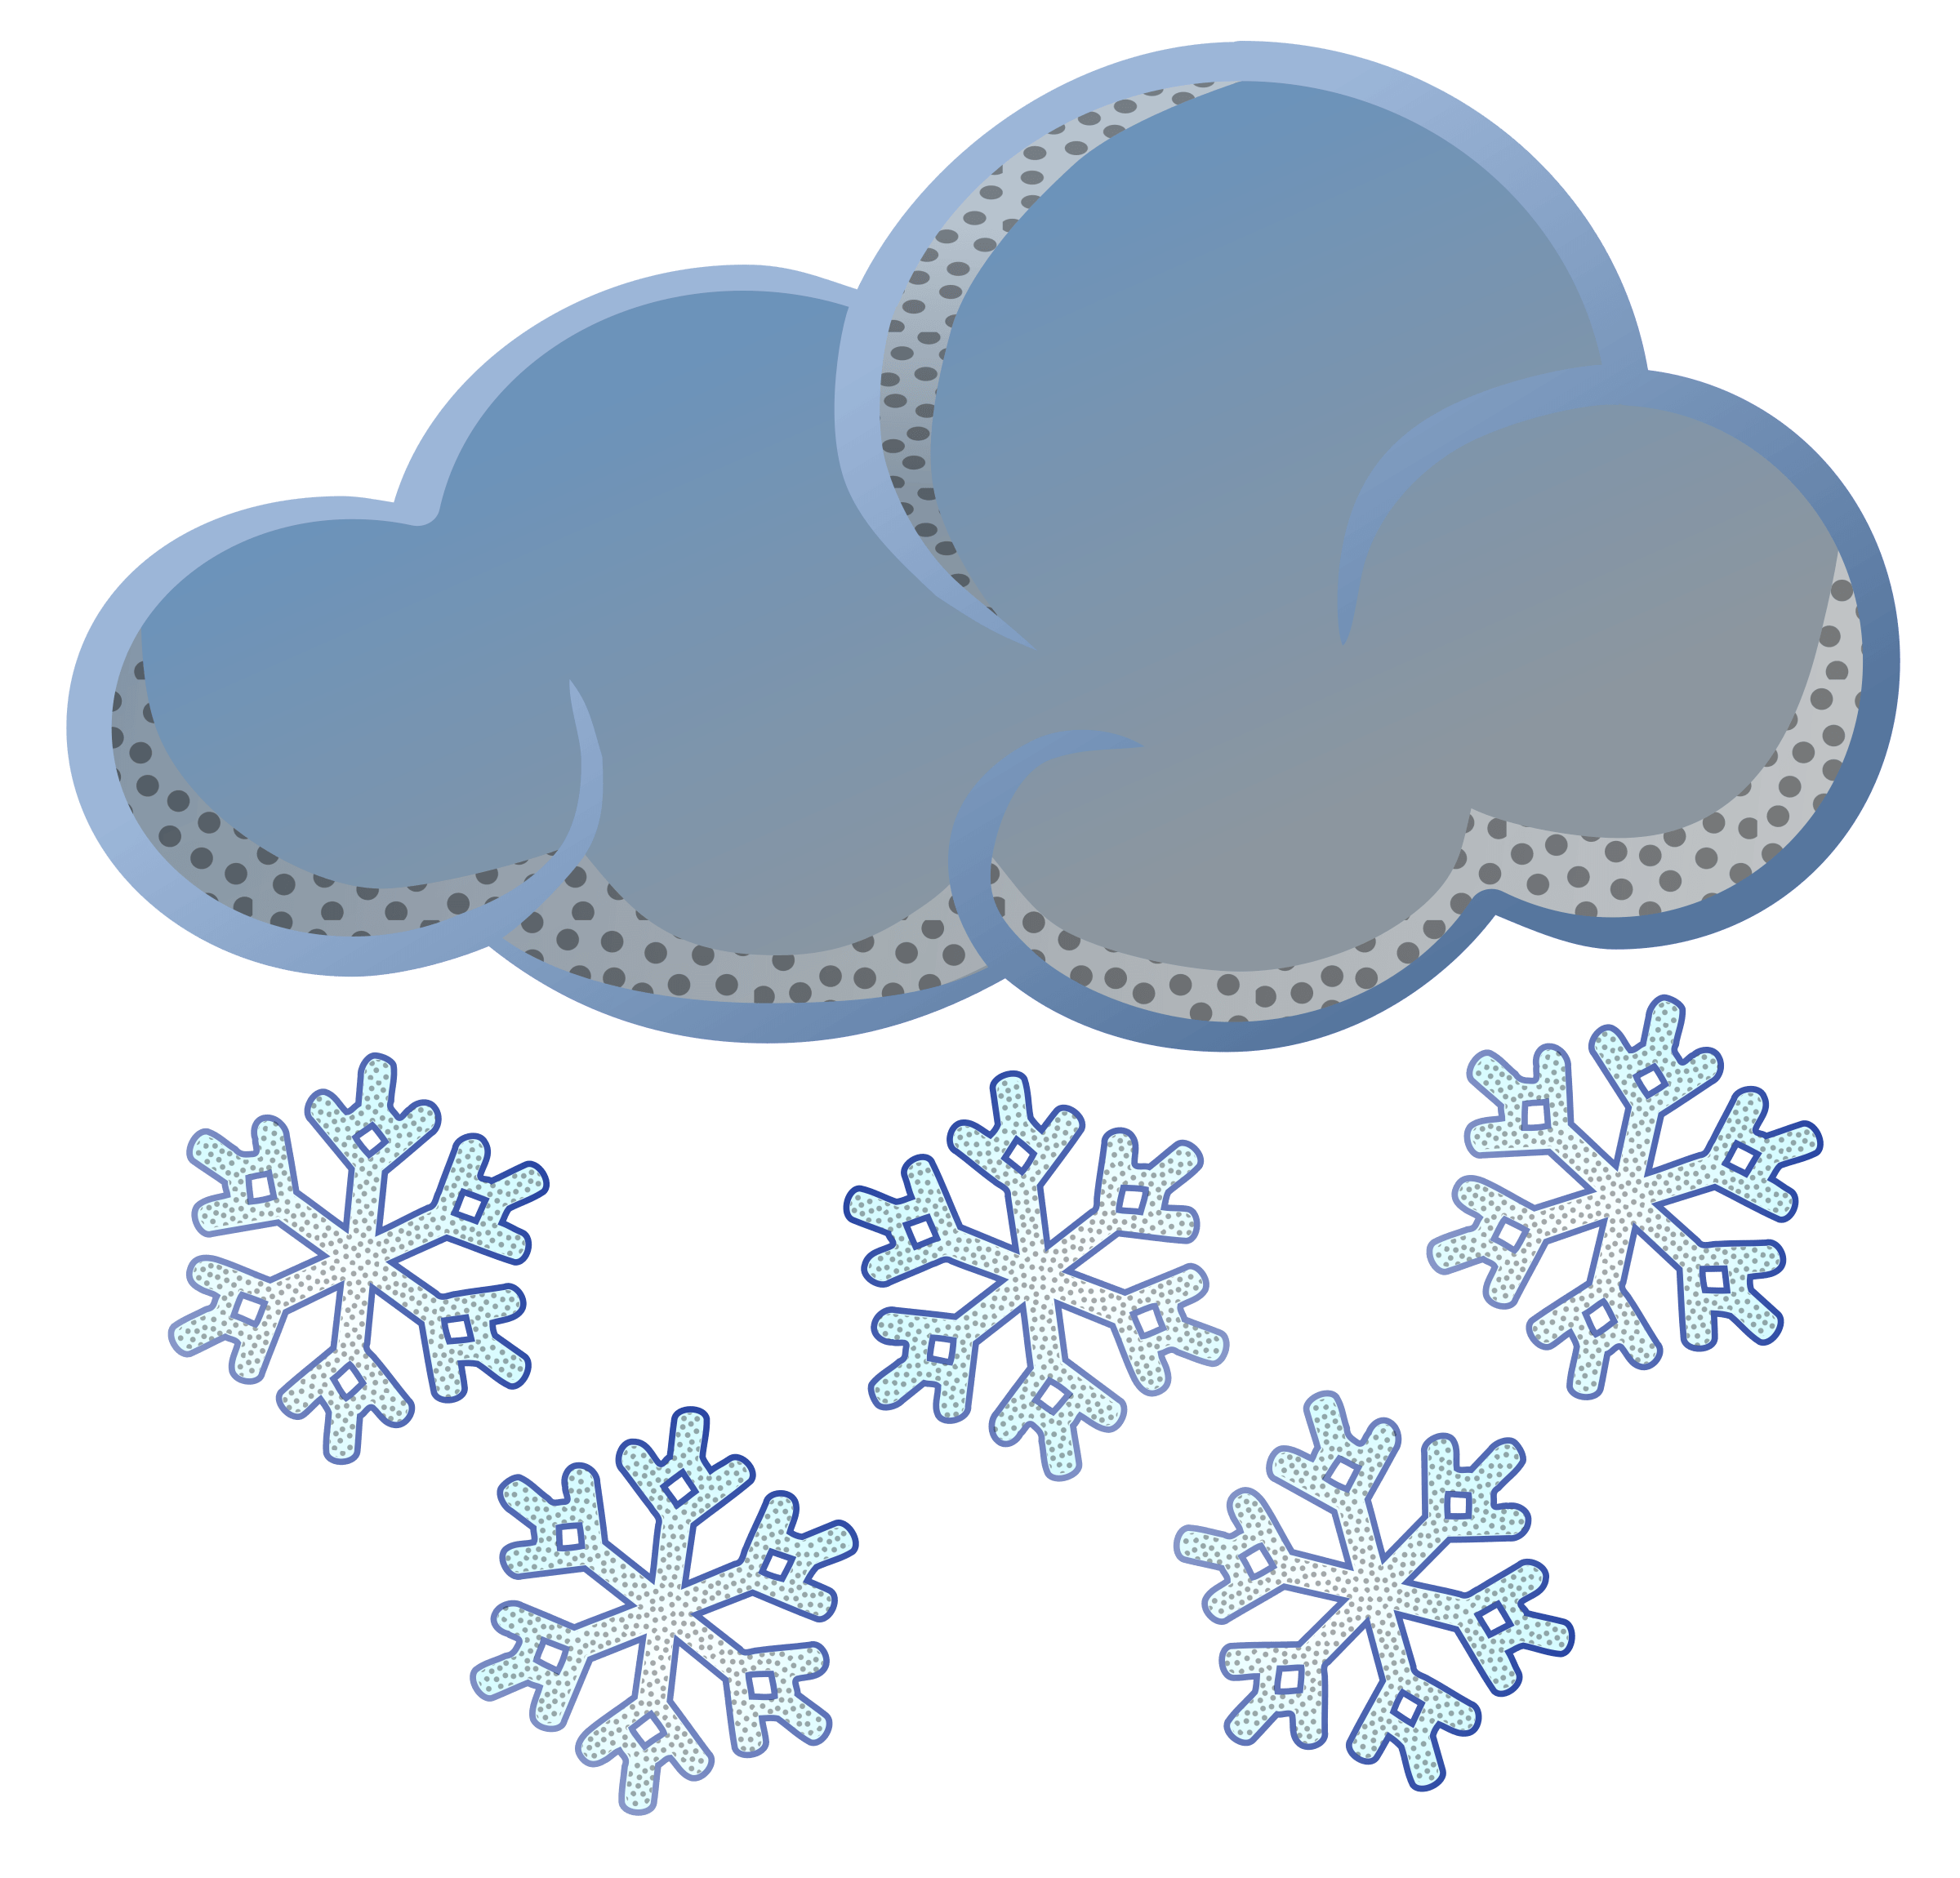 Free Download Of Snowing Icon Clipart PNG Transparent Background, Free  Download #24389 - FreeIconsPNG